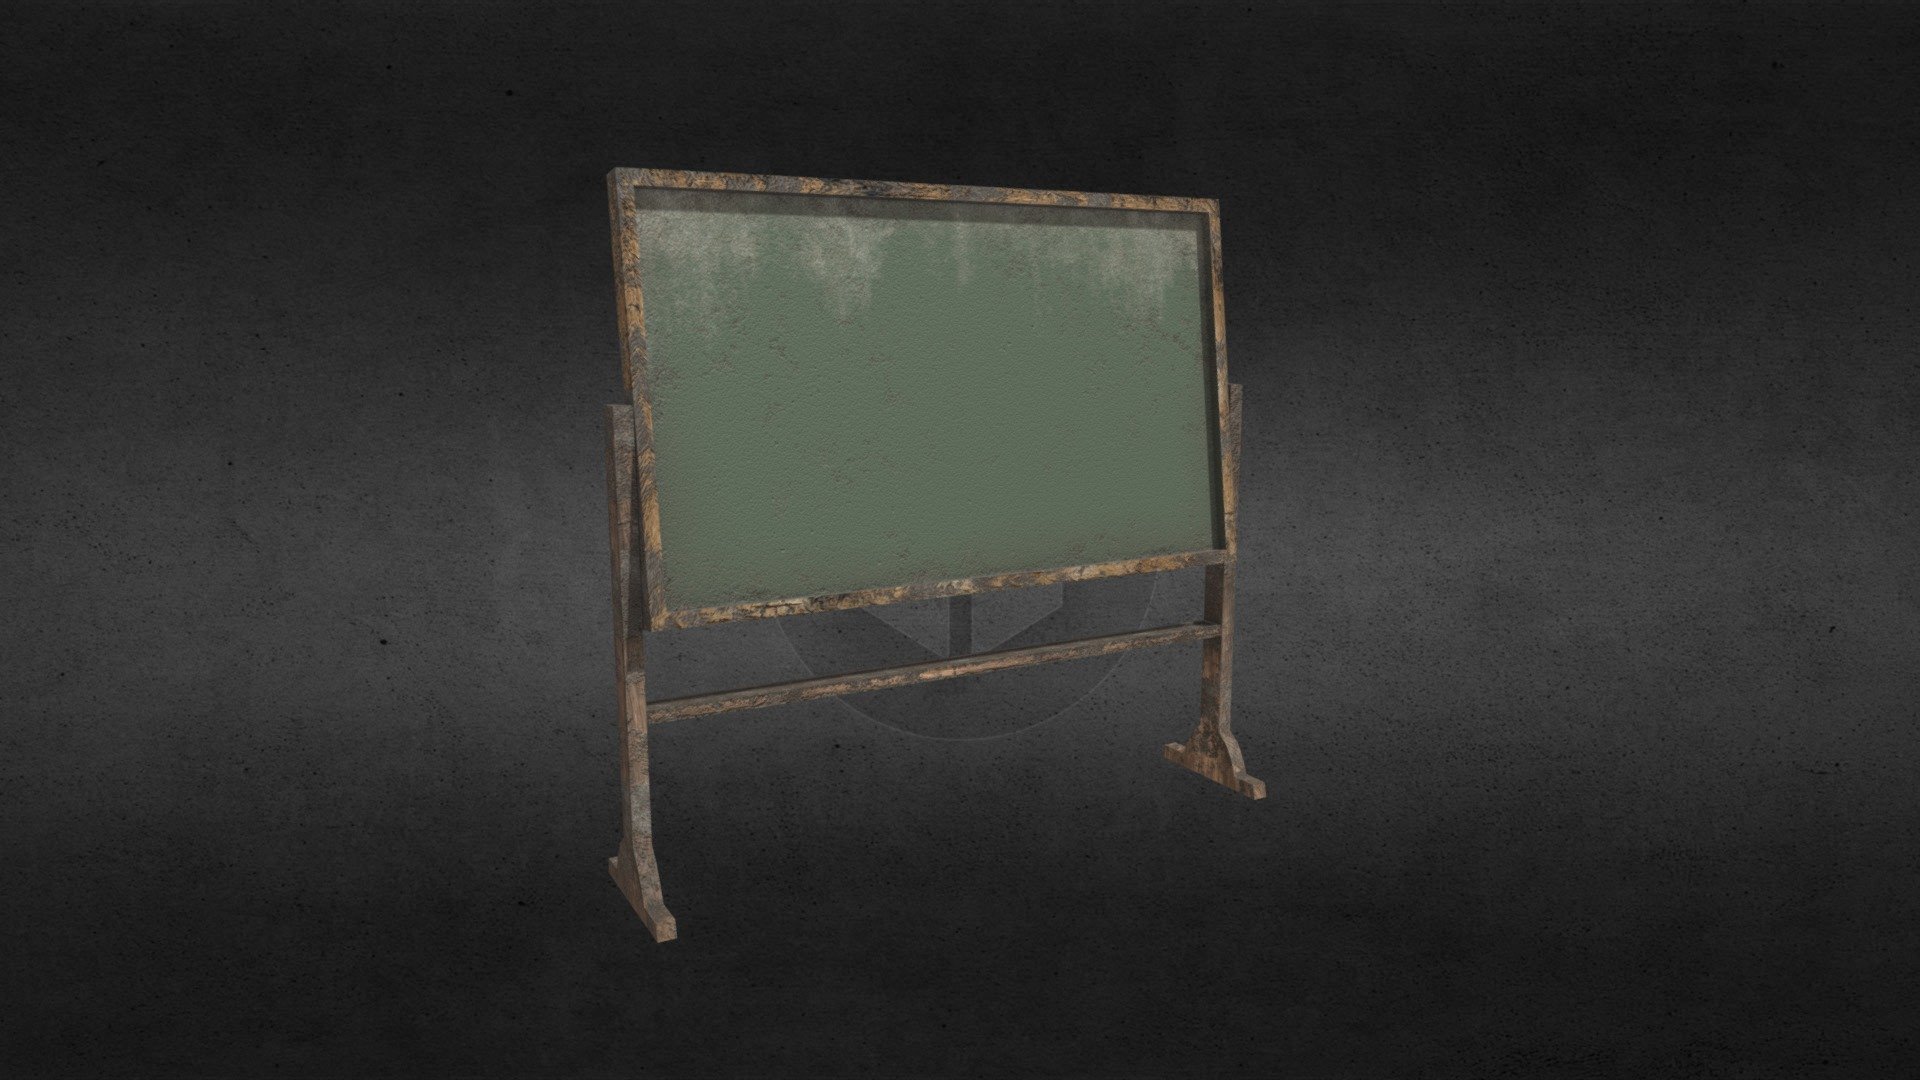 Old blackboard with dust, dirt and deteriorated. No animation avaliable 3d model